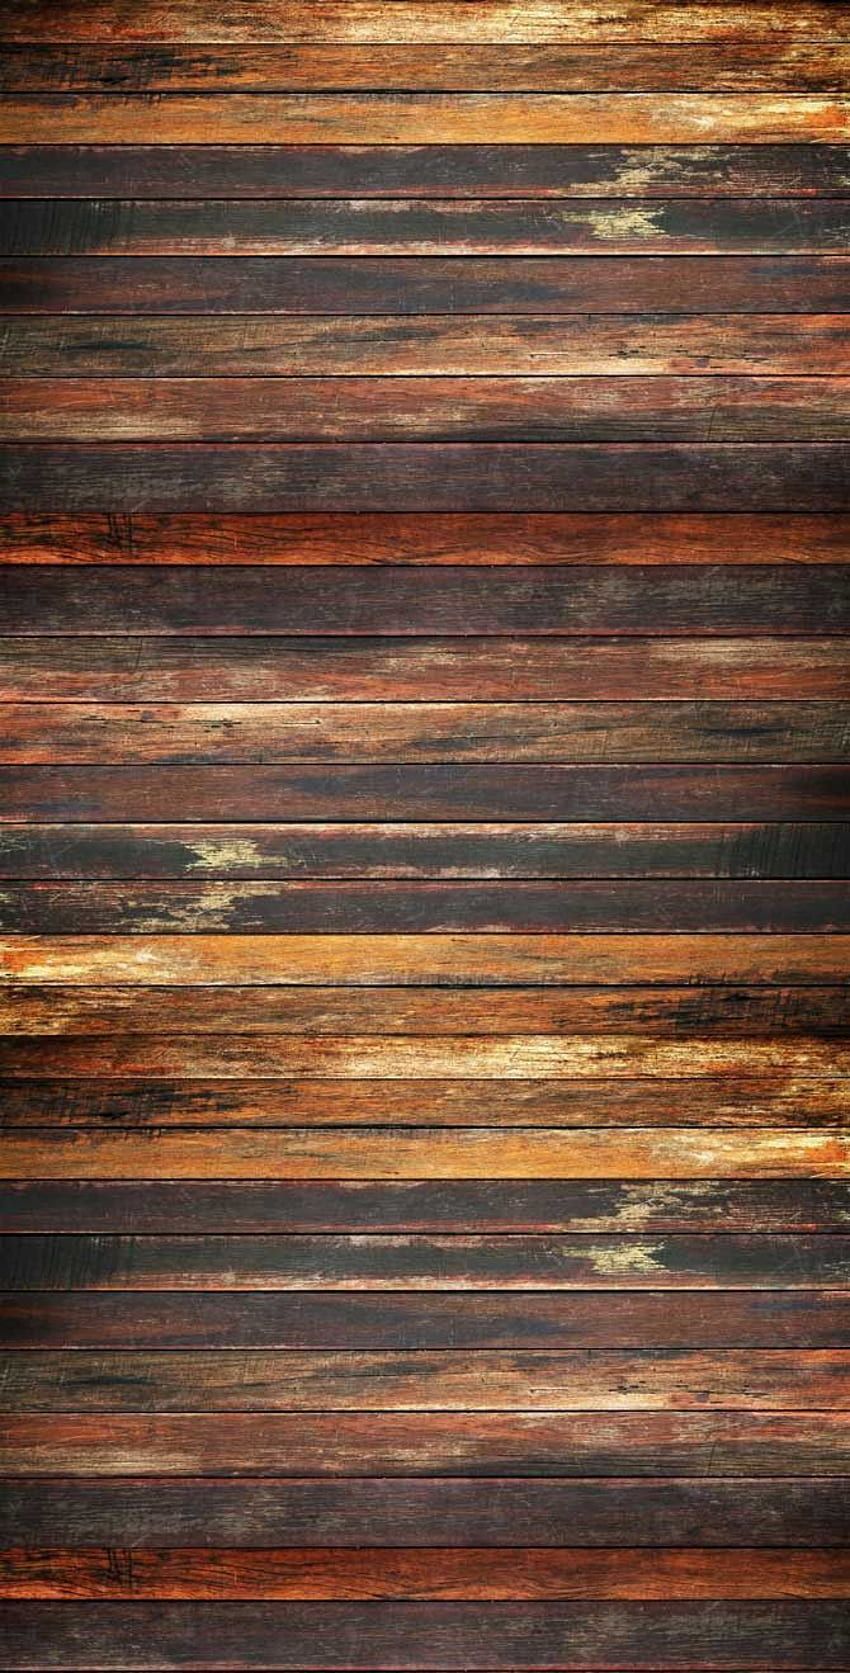 A wooden background for photography - Woods